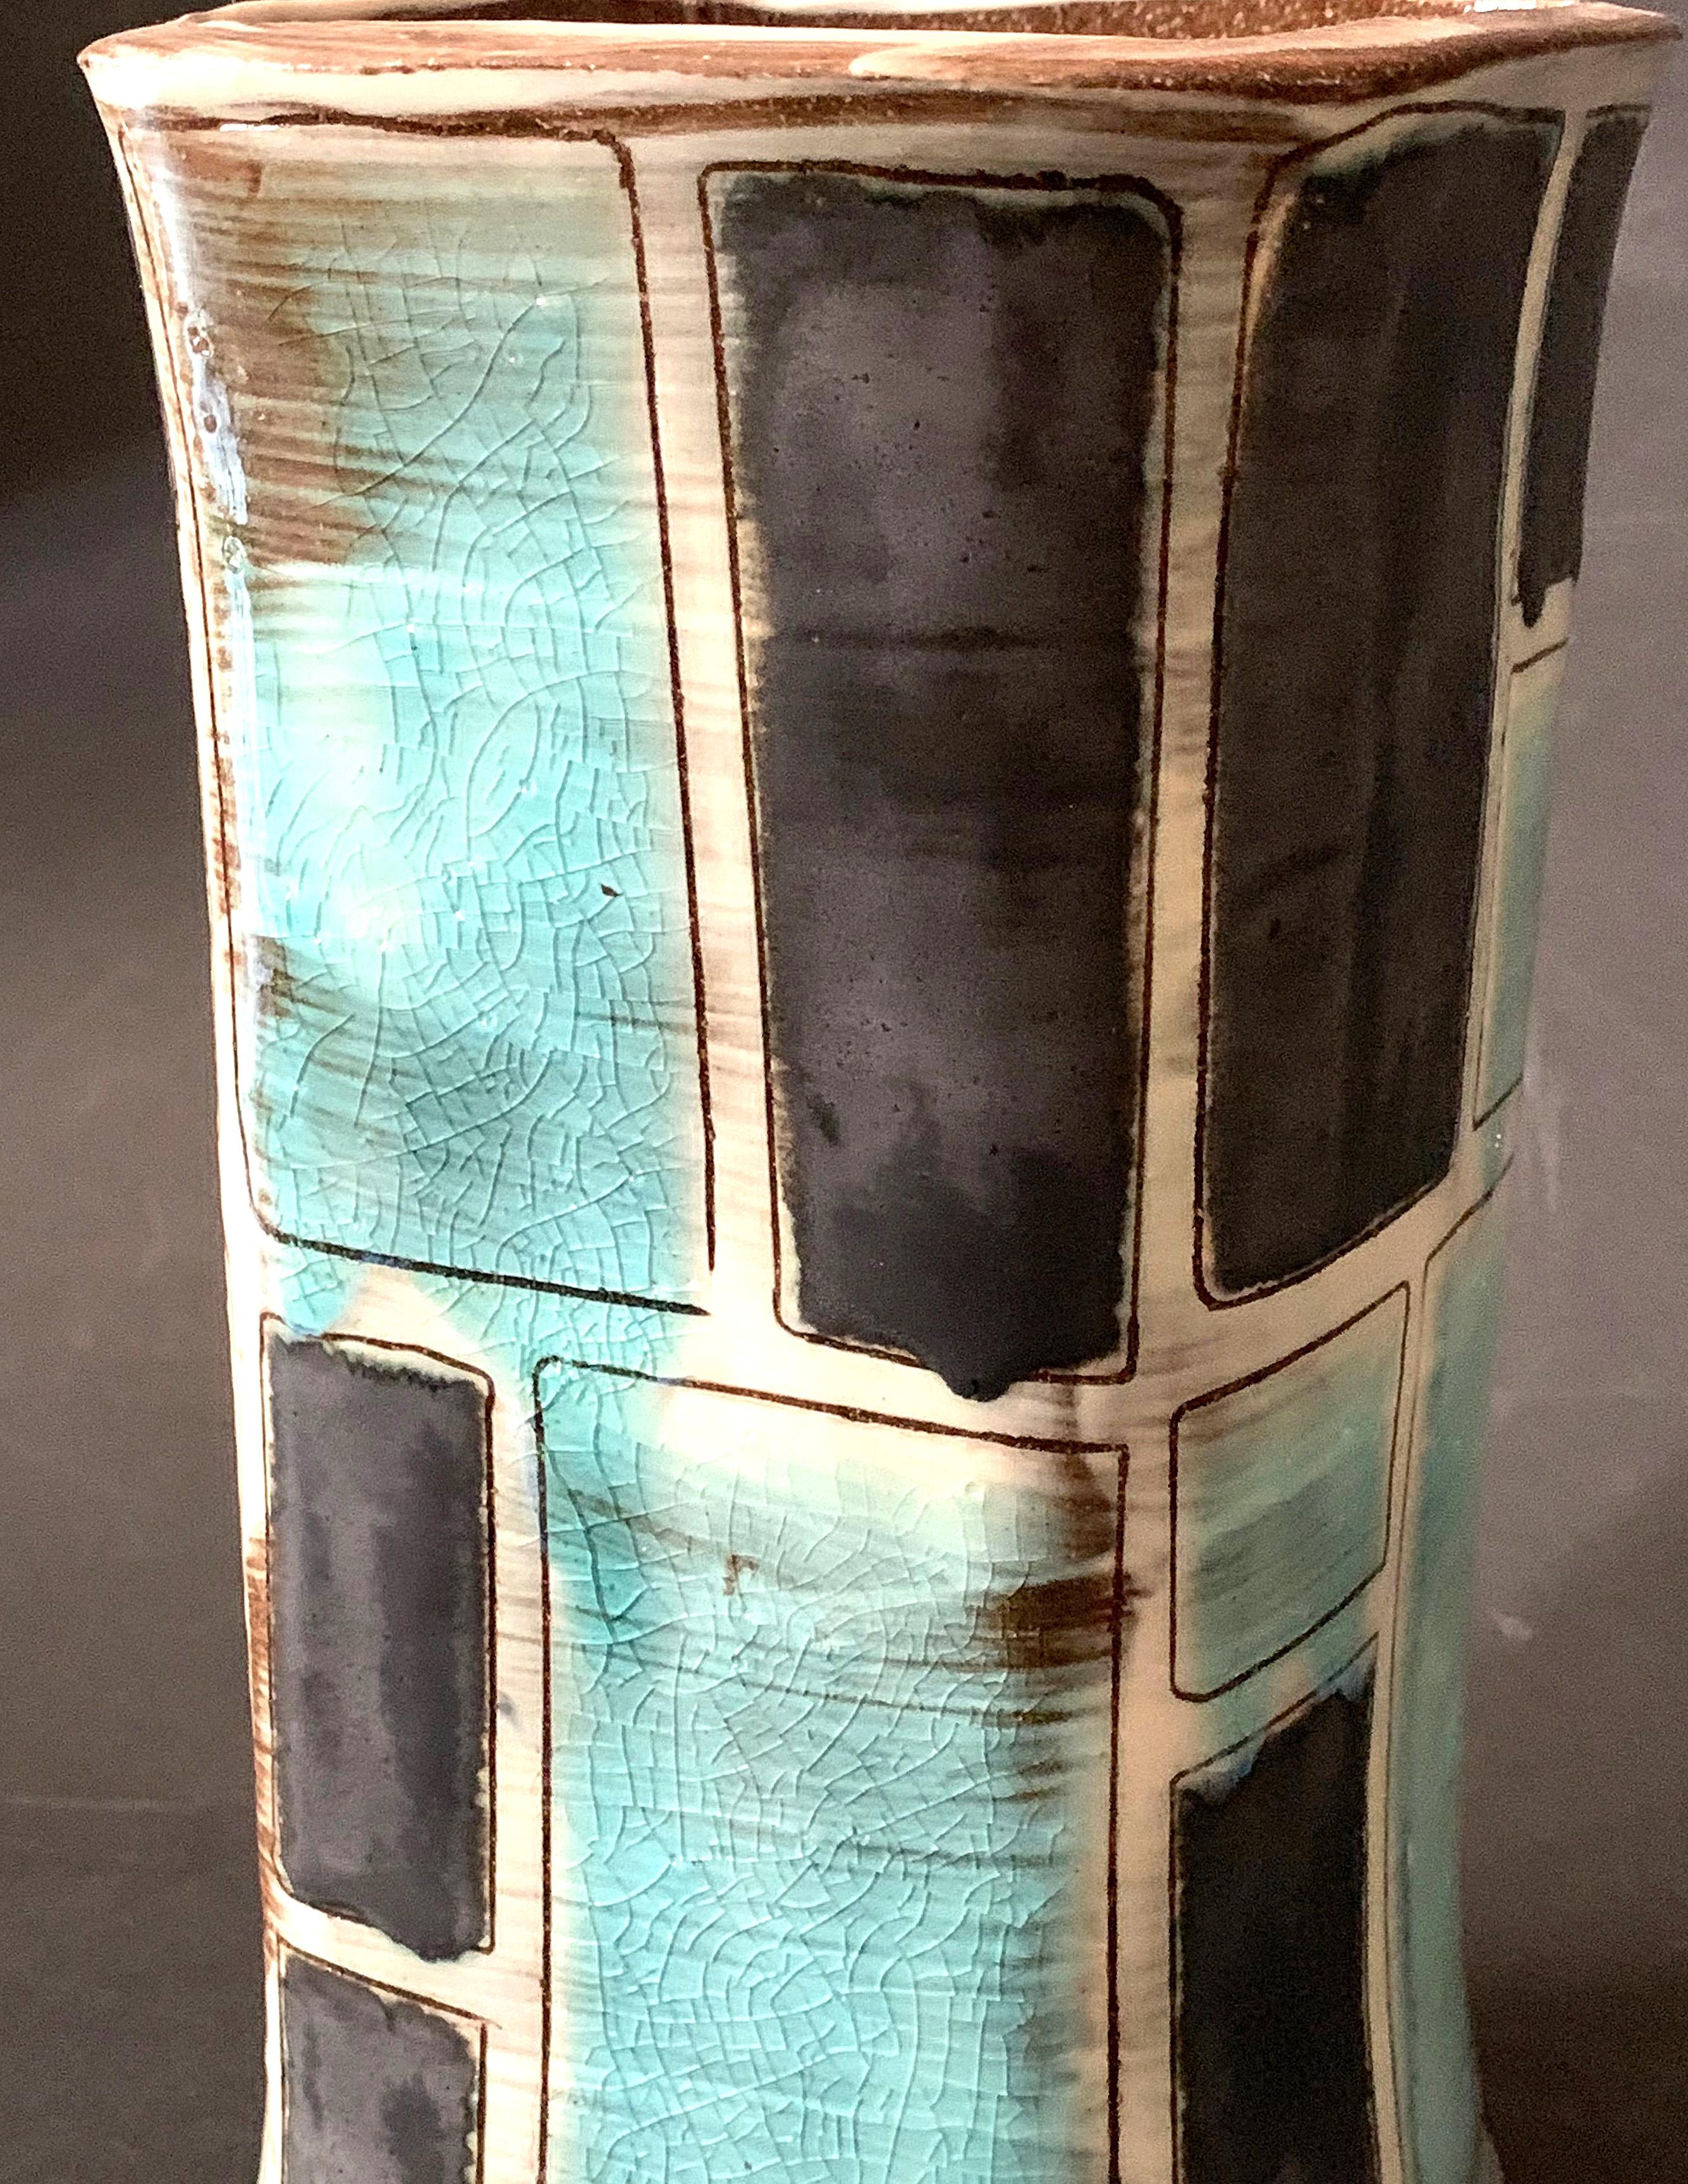 Substantial and beautifully glazed, this midcentury vase is decorated with a series of black and aqua panels on a white ground. Clearly influenced by the glass and pottery produced in Italy after World War II, the vase's color palette and decorative